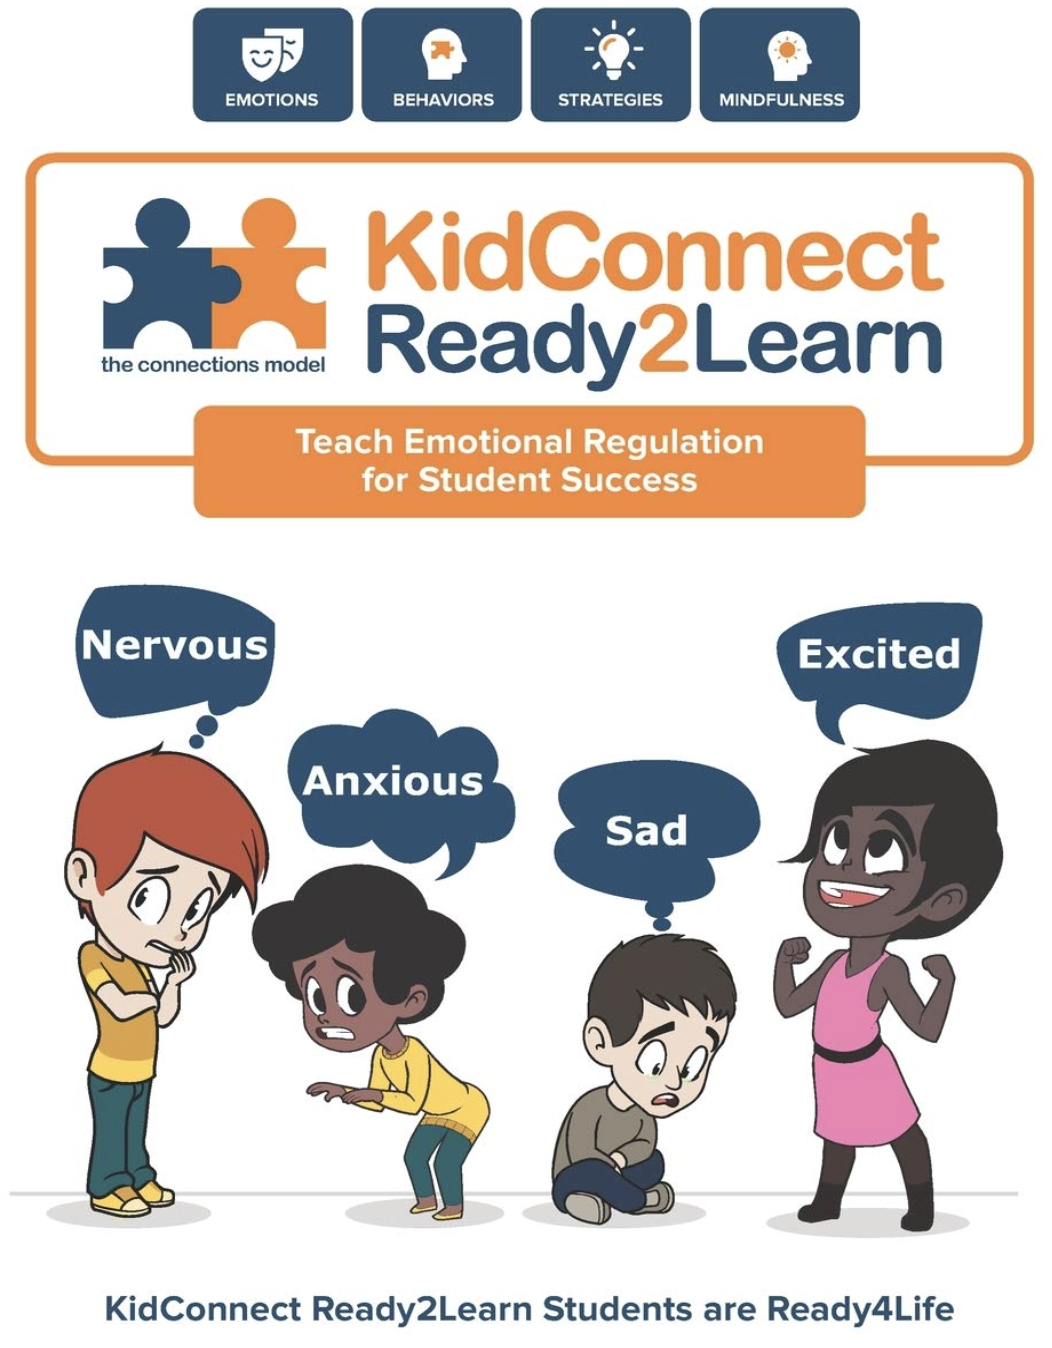 
KidConnect Ready2Learn Curriculum: Teach Emotional Regulation for Student Success